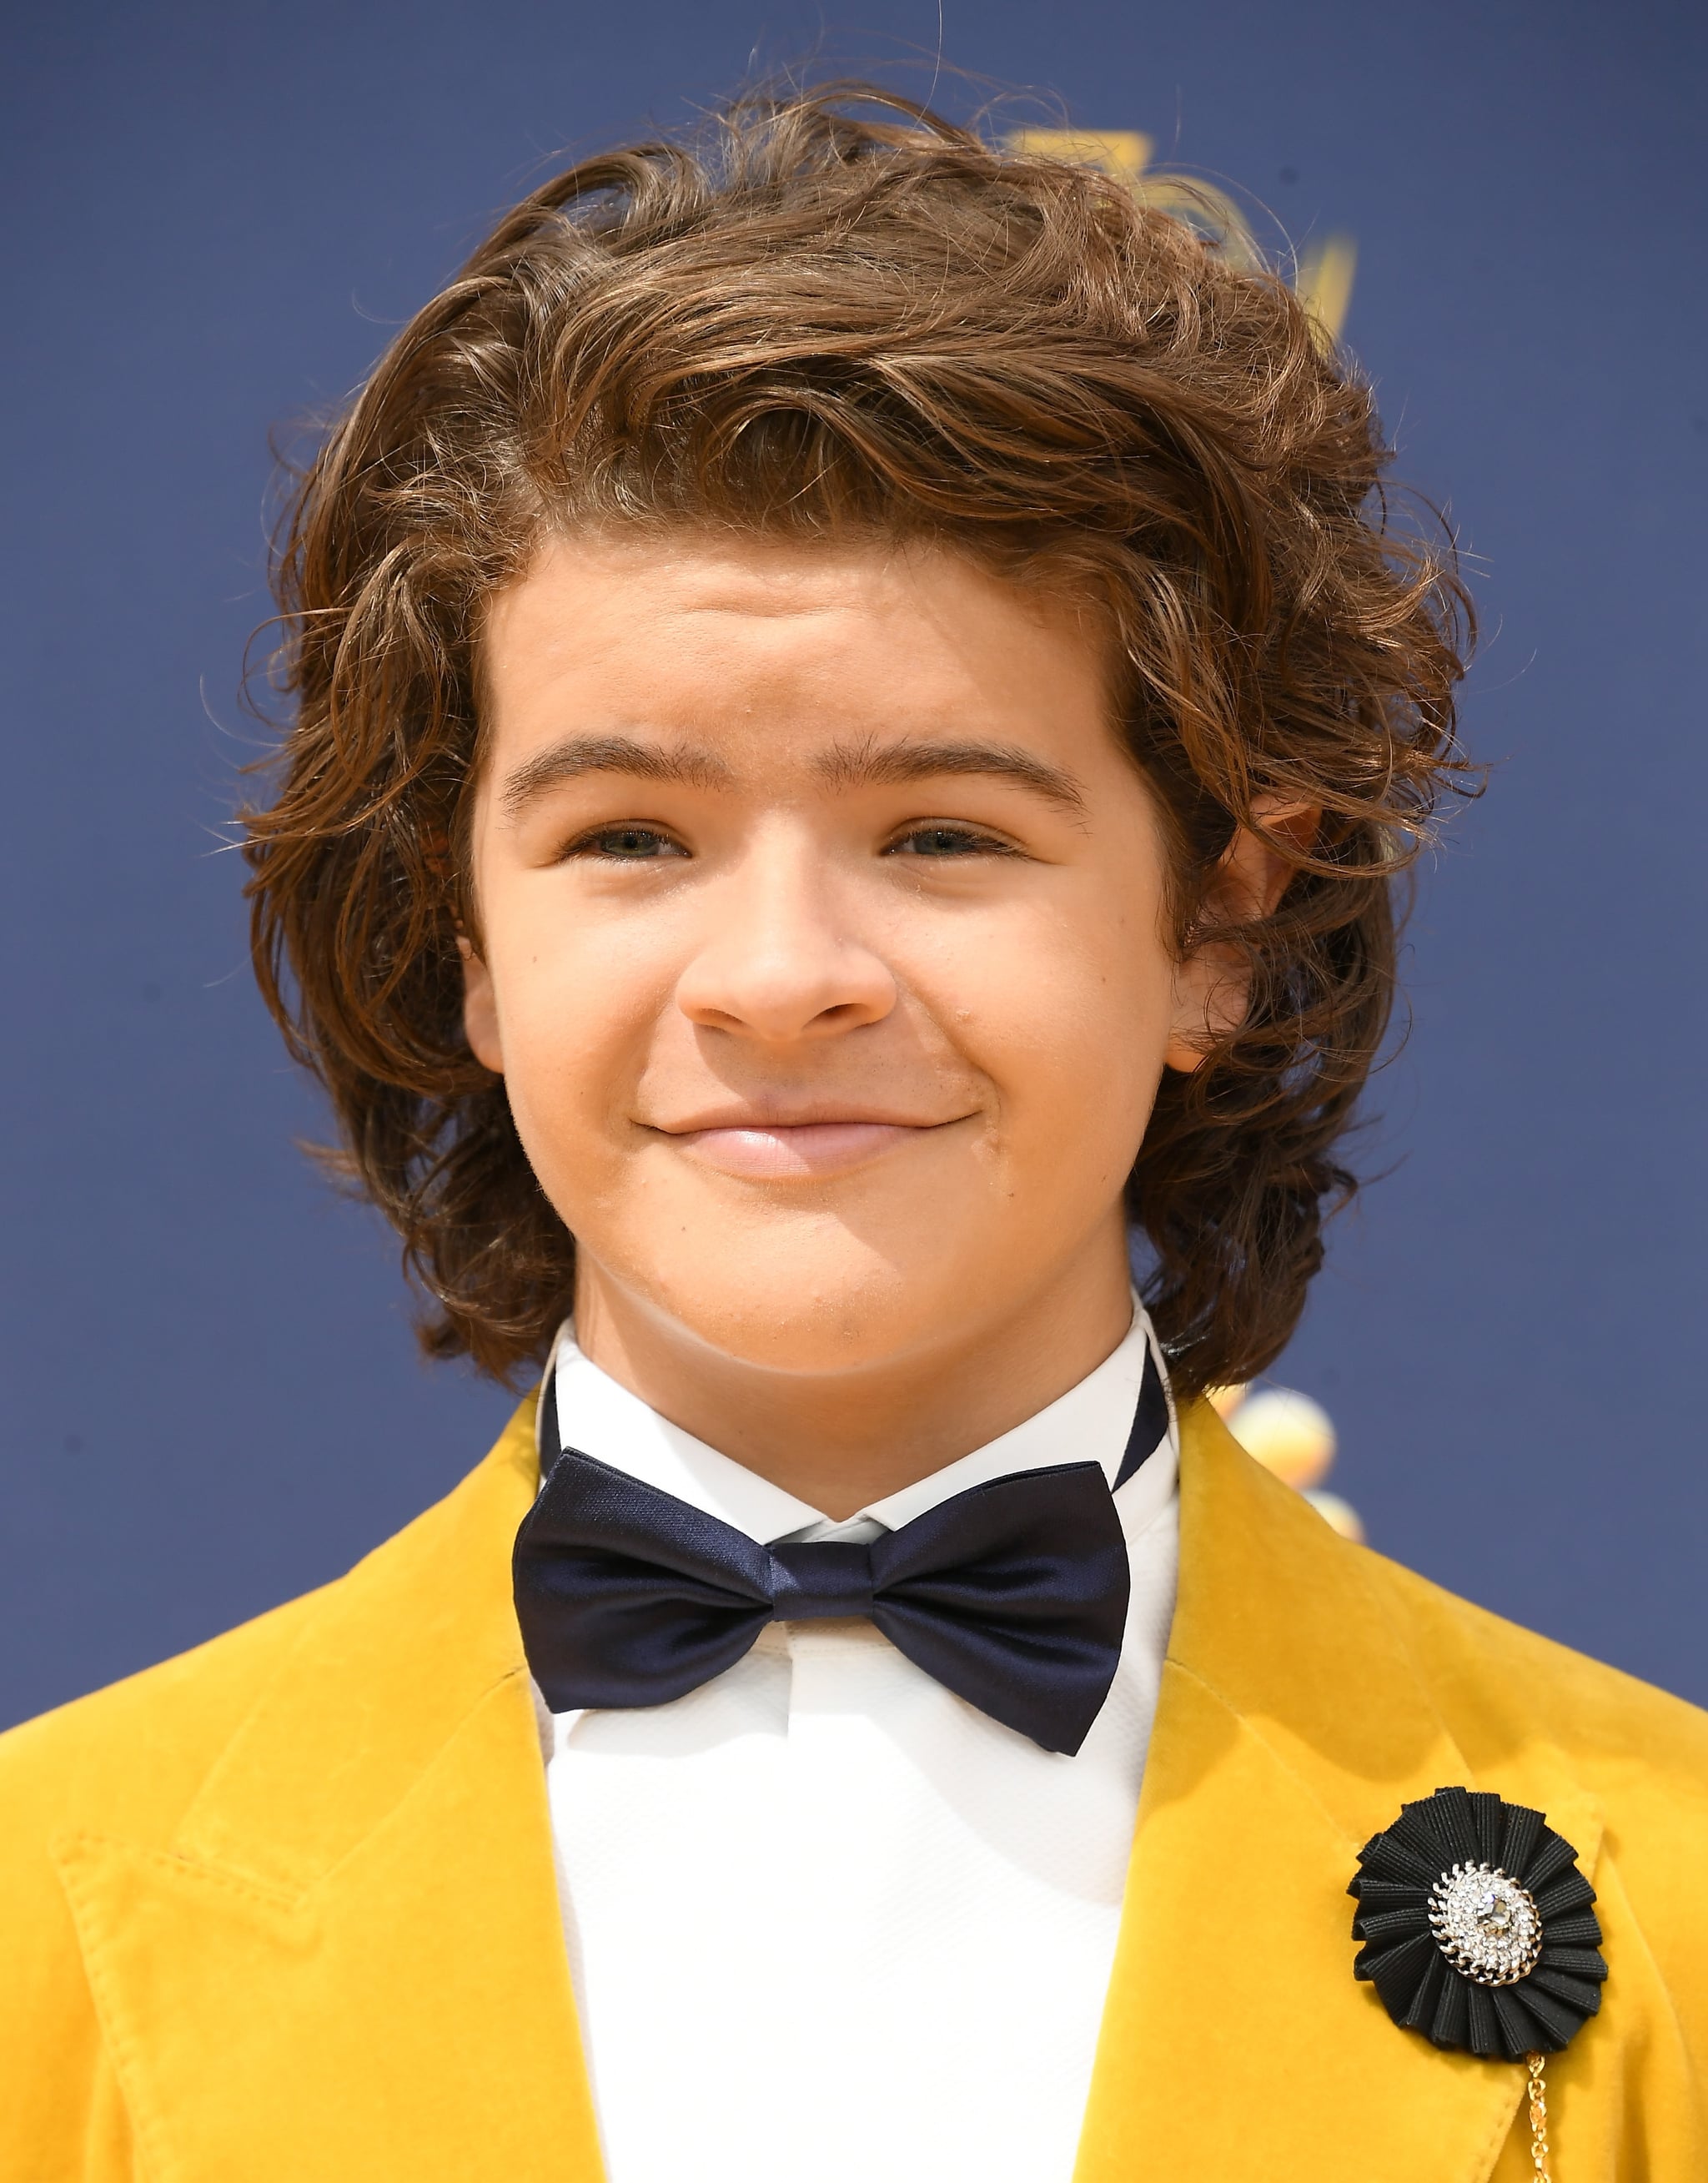 LOS ANGELES, CA - SEPTEMBER 17:  Gaten Matarazzo attends the 70th Emmy Awards at Microsoft Theatre on September 17, 2018 in Los Angeles, California.  (Photo by Steve Granitz/WireImage,)